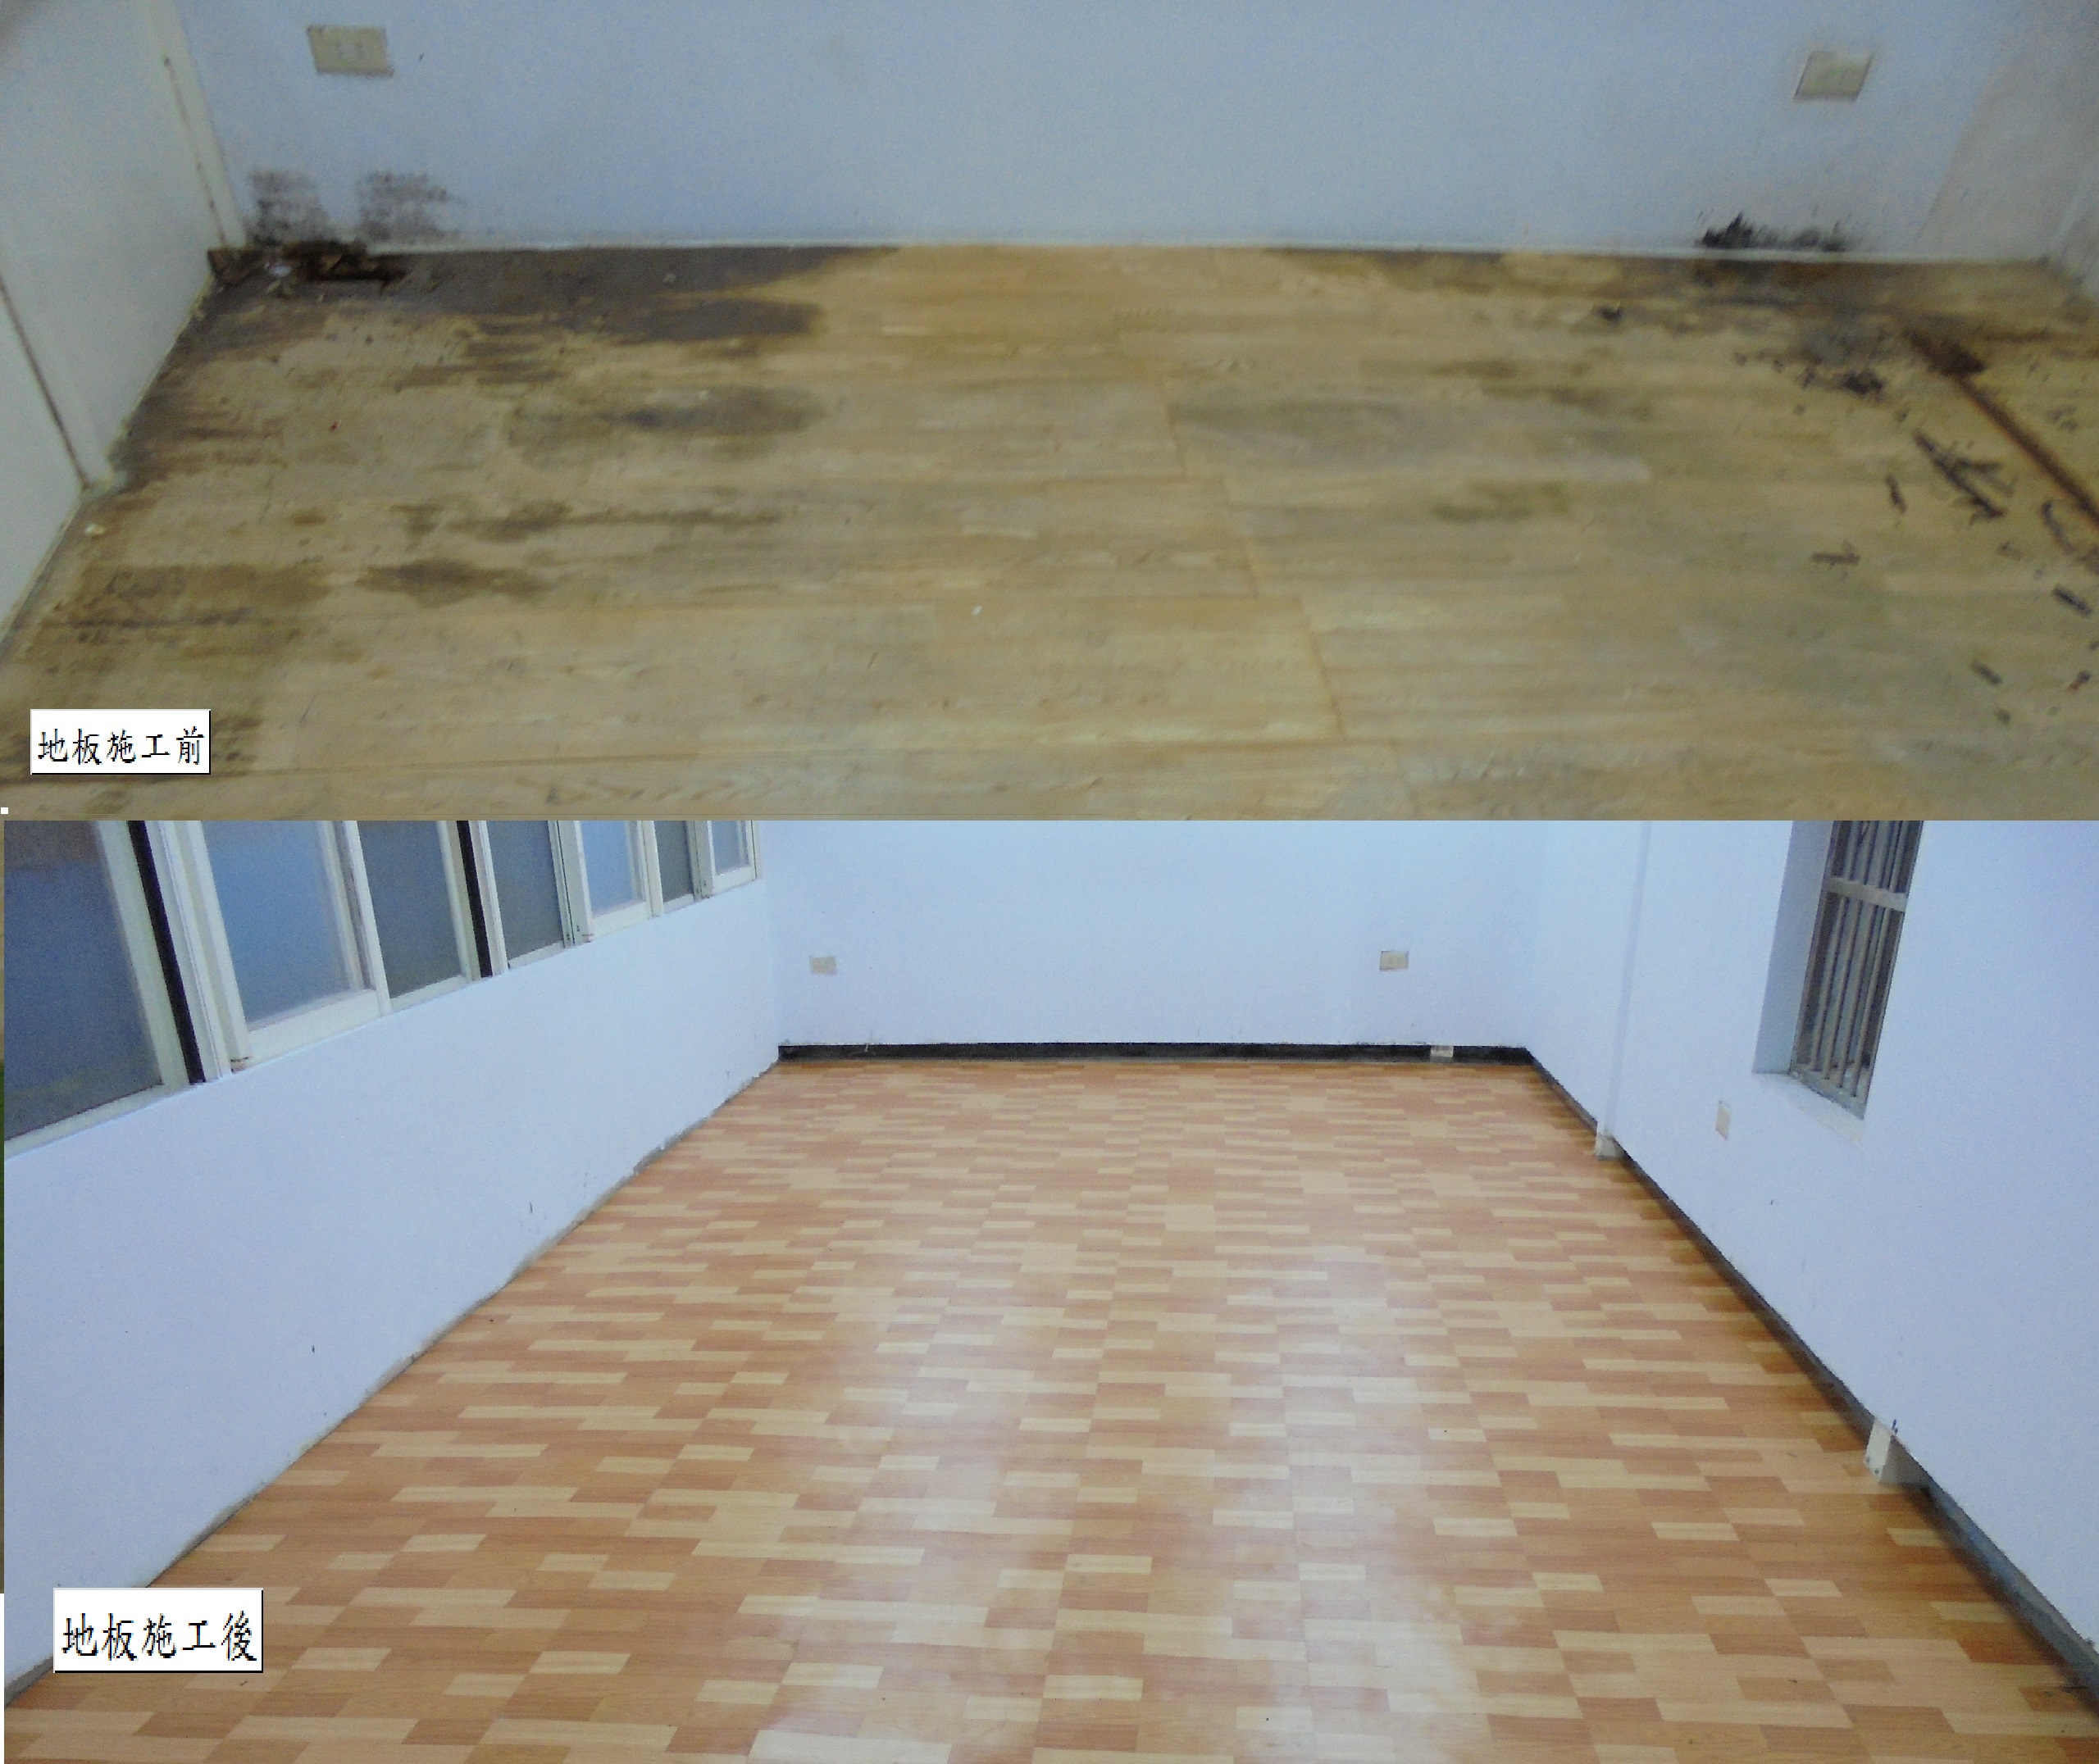 Before and after the floor